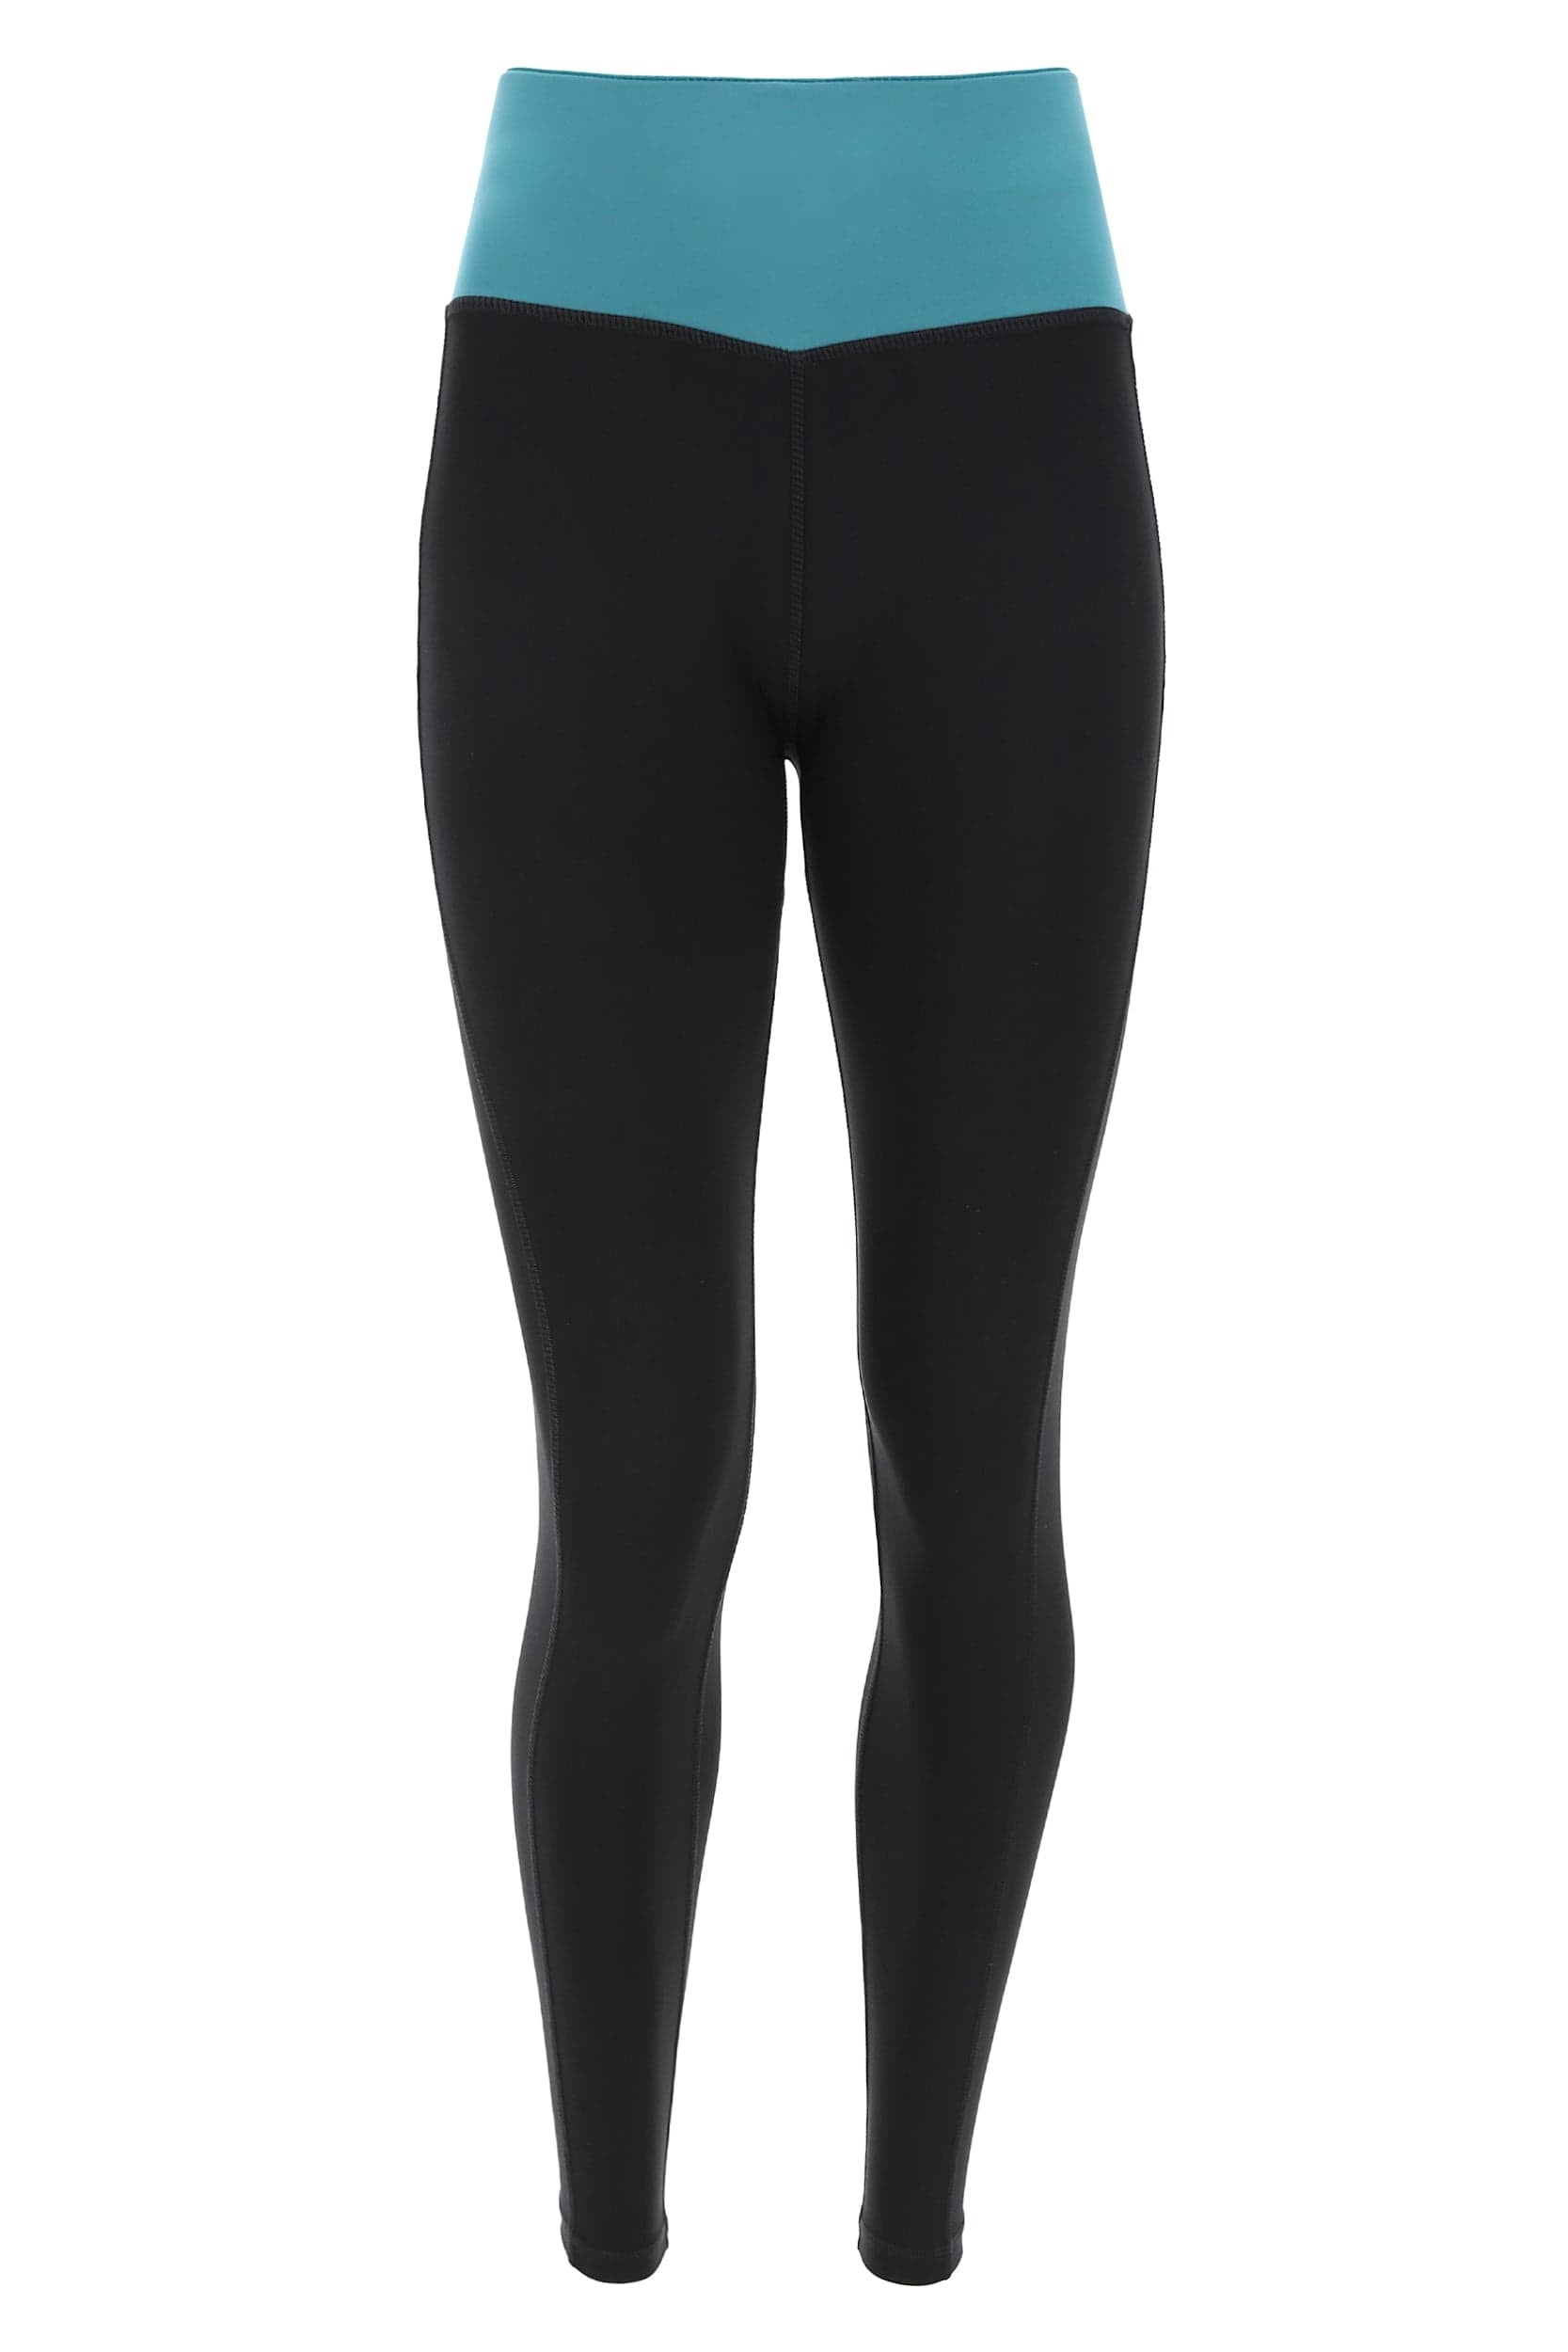 WR.UP® Sport - High Waisted - Full Length - Black & Pacific Blue 5